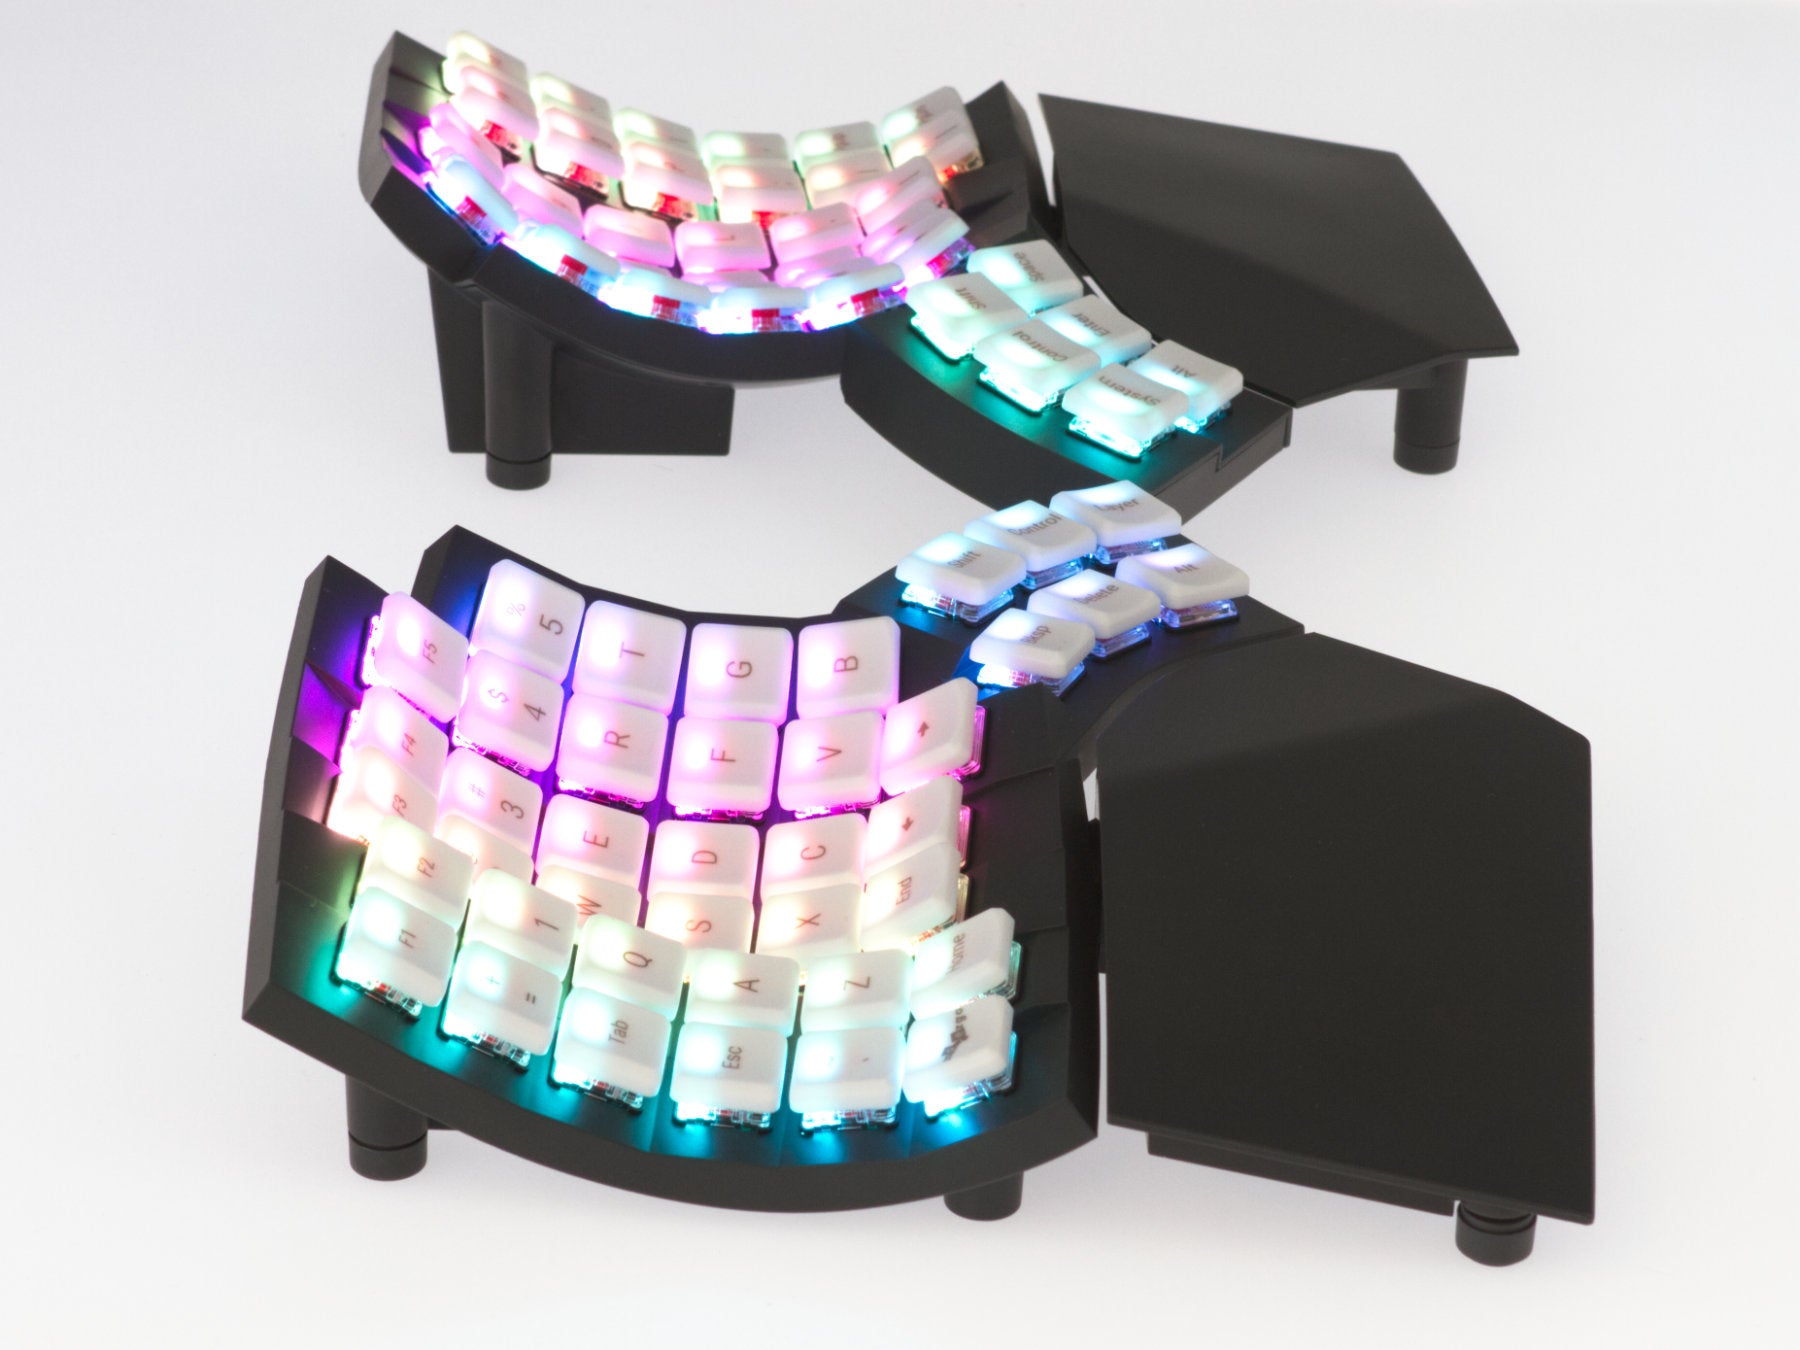 Glove80 gaming edition keyboard backlit with rainbow LED lights